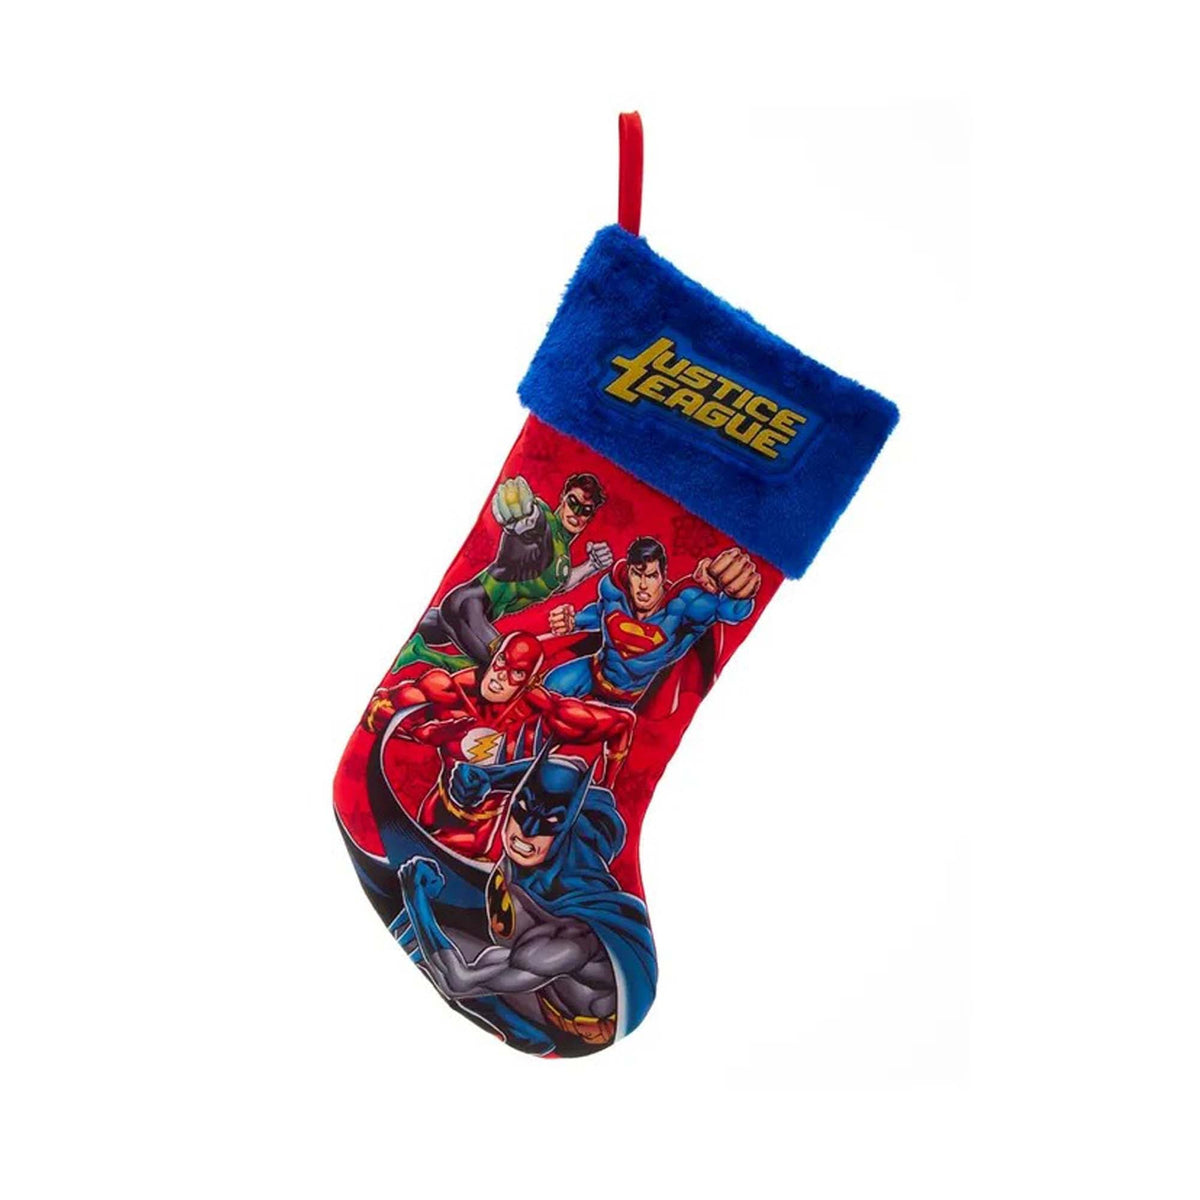 KURT S. ADLER INC Christmas Justice League Christmas Stocking, 19 Inches, 1 Count